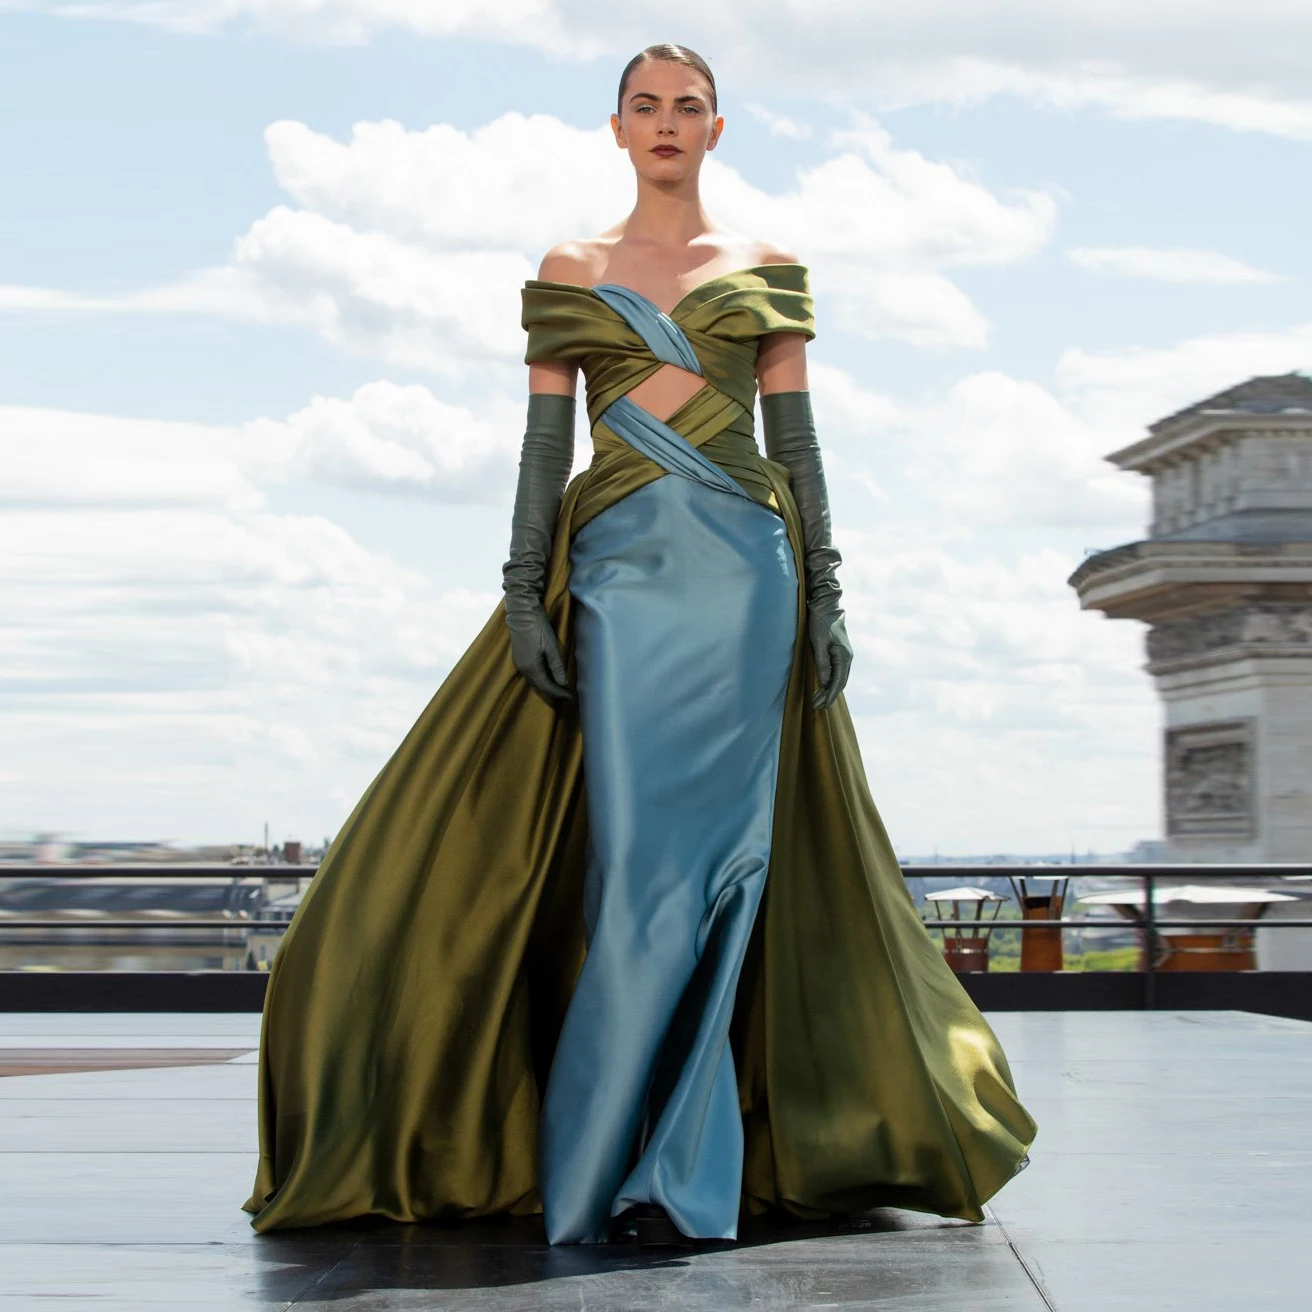 

Unique Color Blocking Mermaid Satin Prom Drsses With Overlay Criss Cross Olive Green&Blue Mix Color Prom Gowns